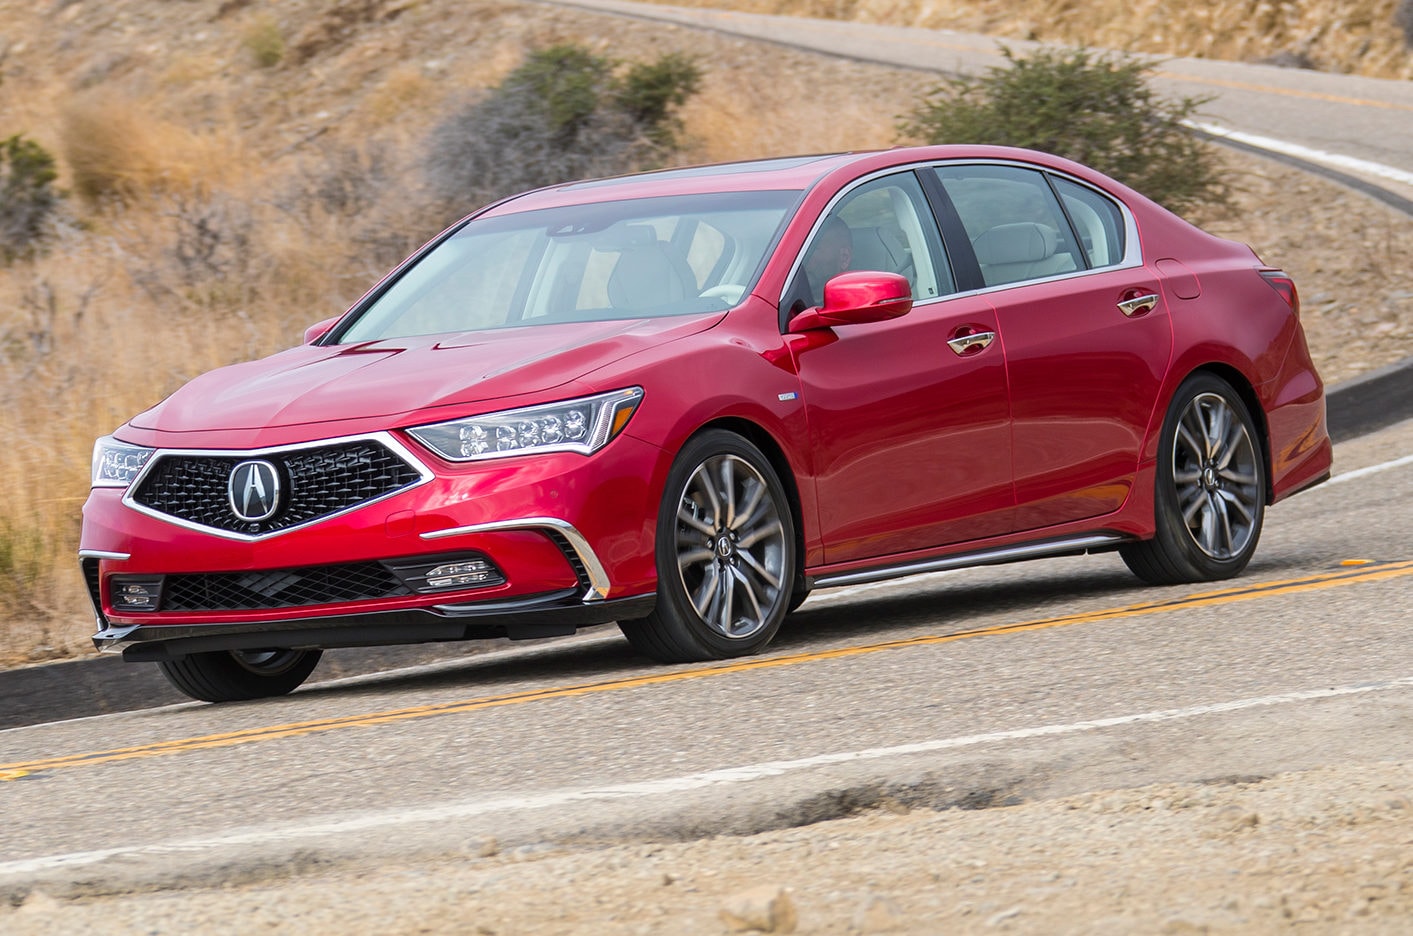 2018 Acura RLX Hybrid First Drive Review: Beakless and Better for It